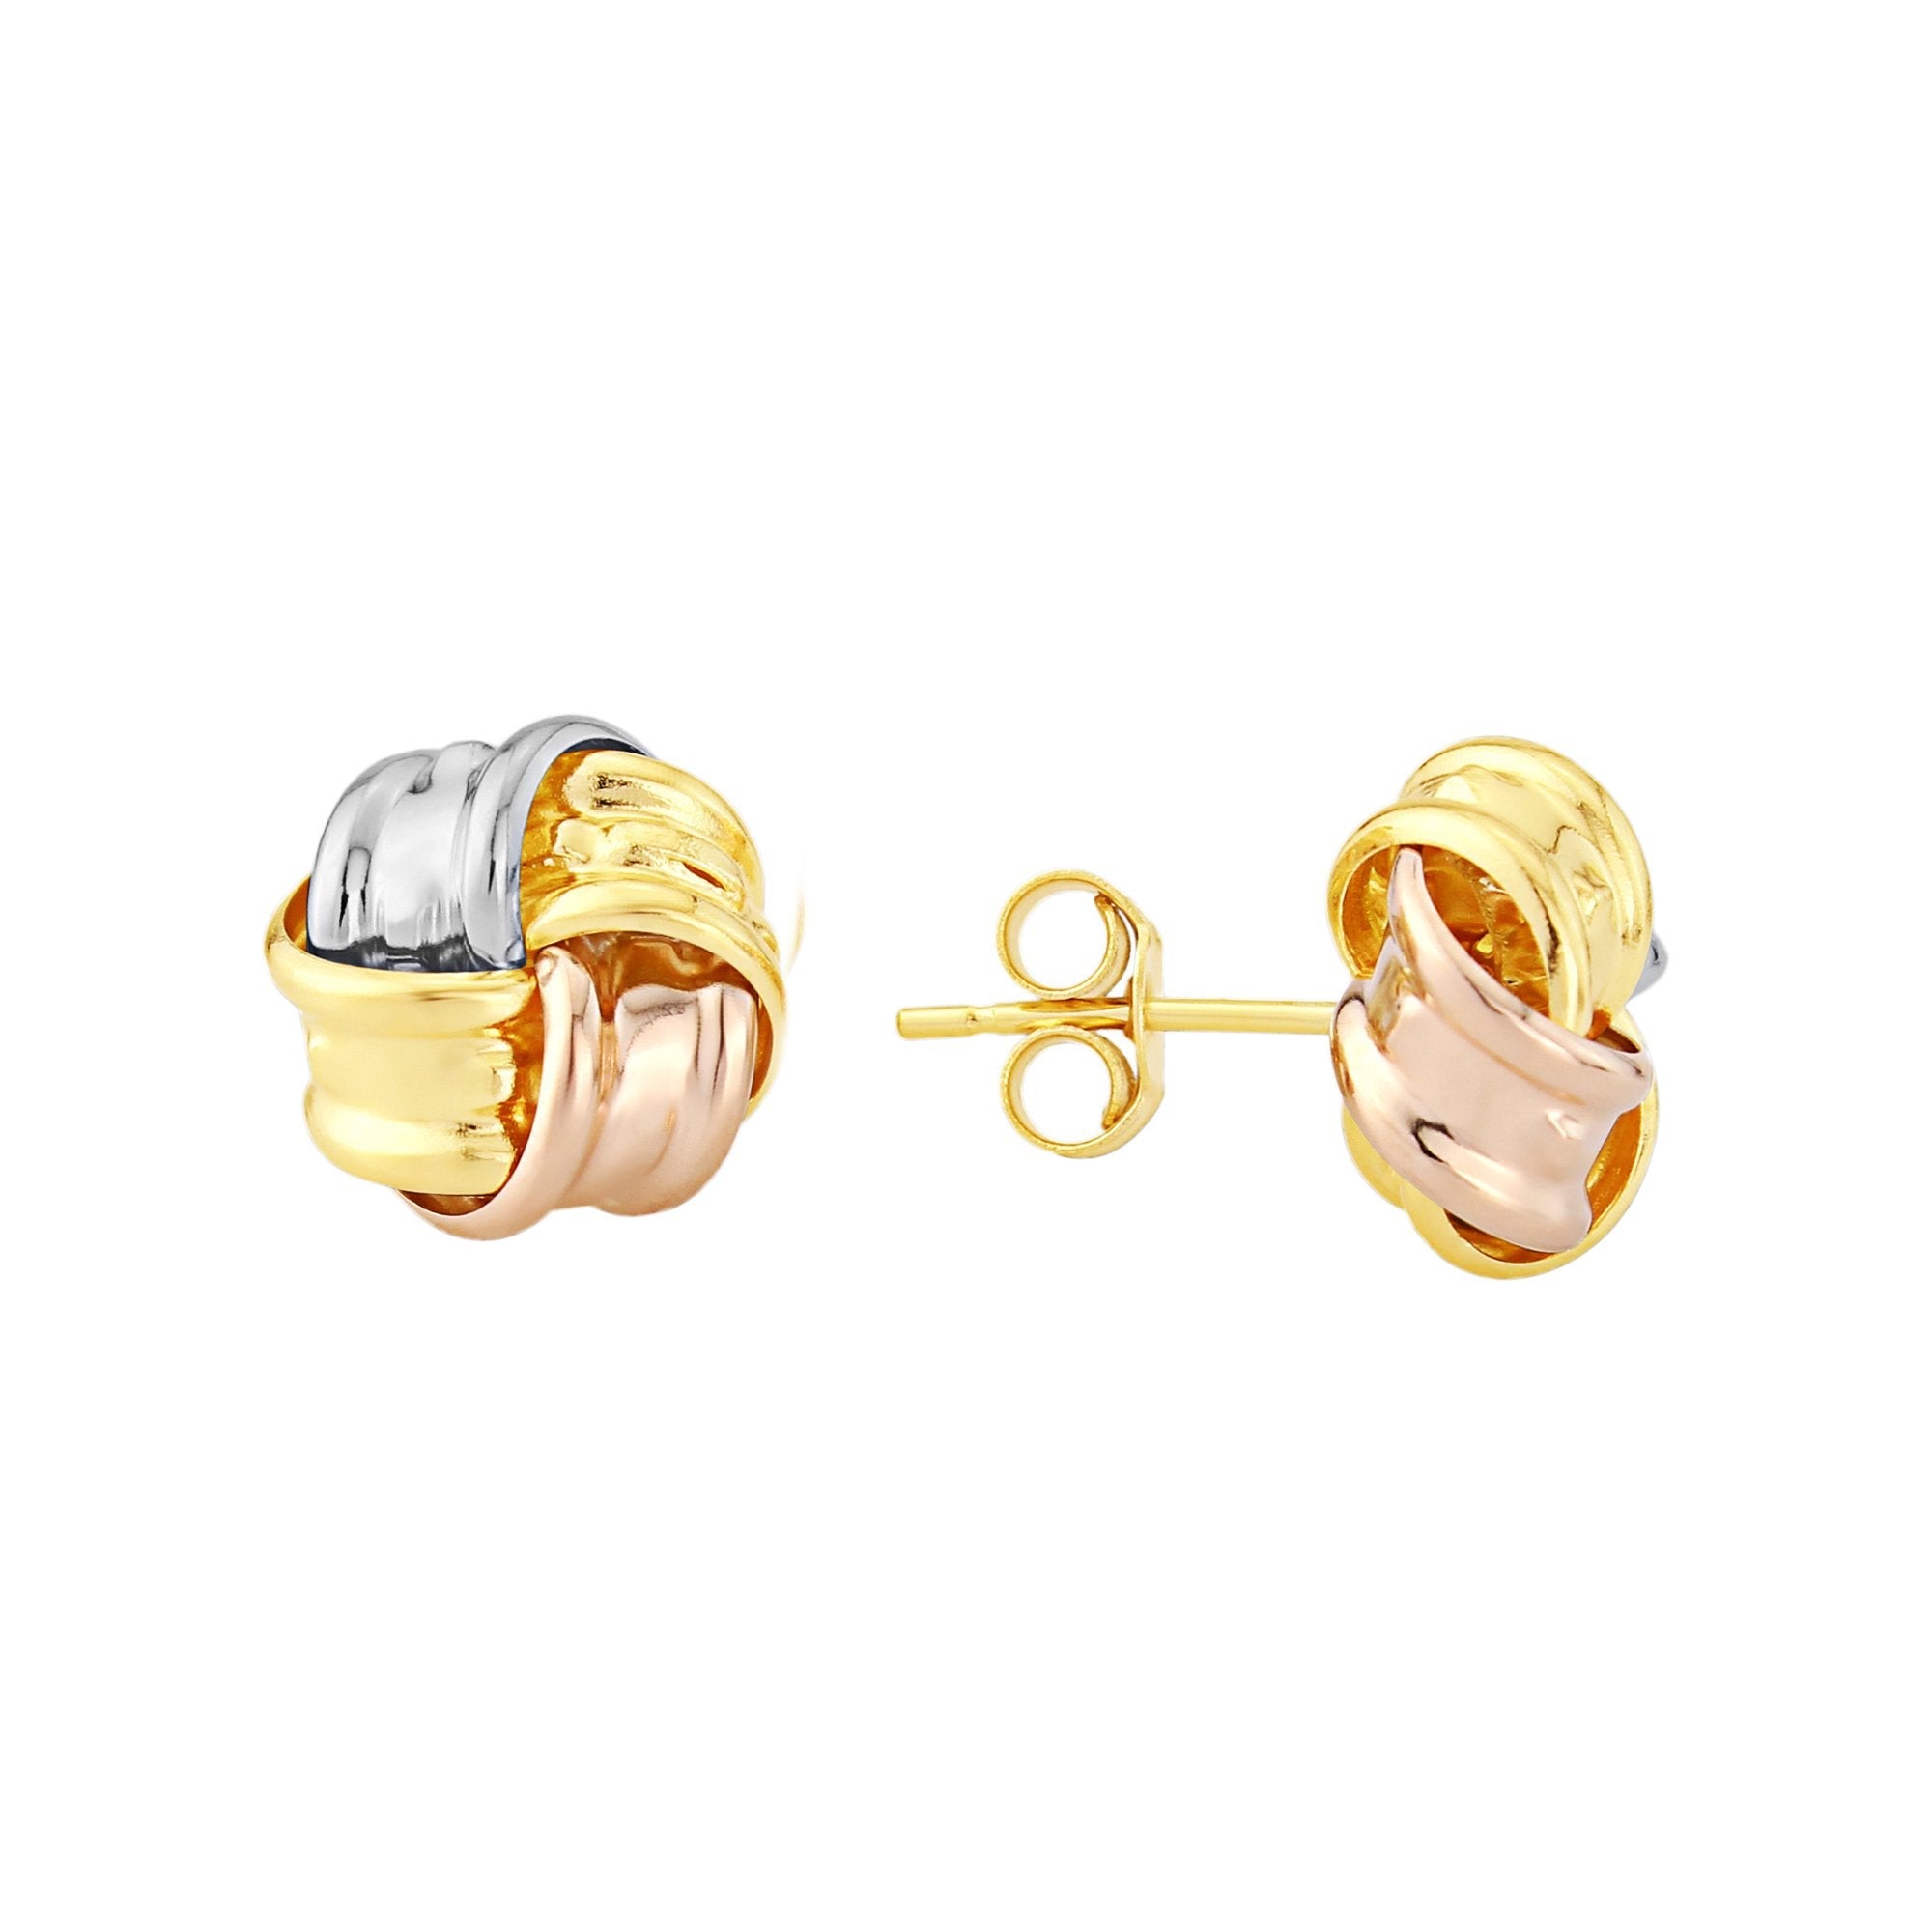 9ct m/c gold knot stud earrings